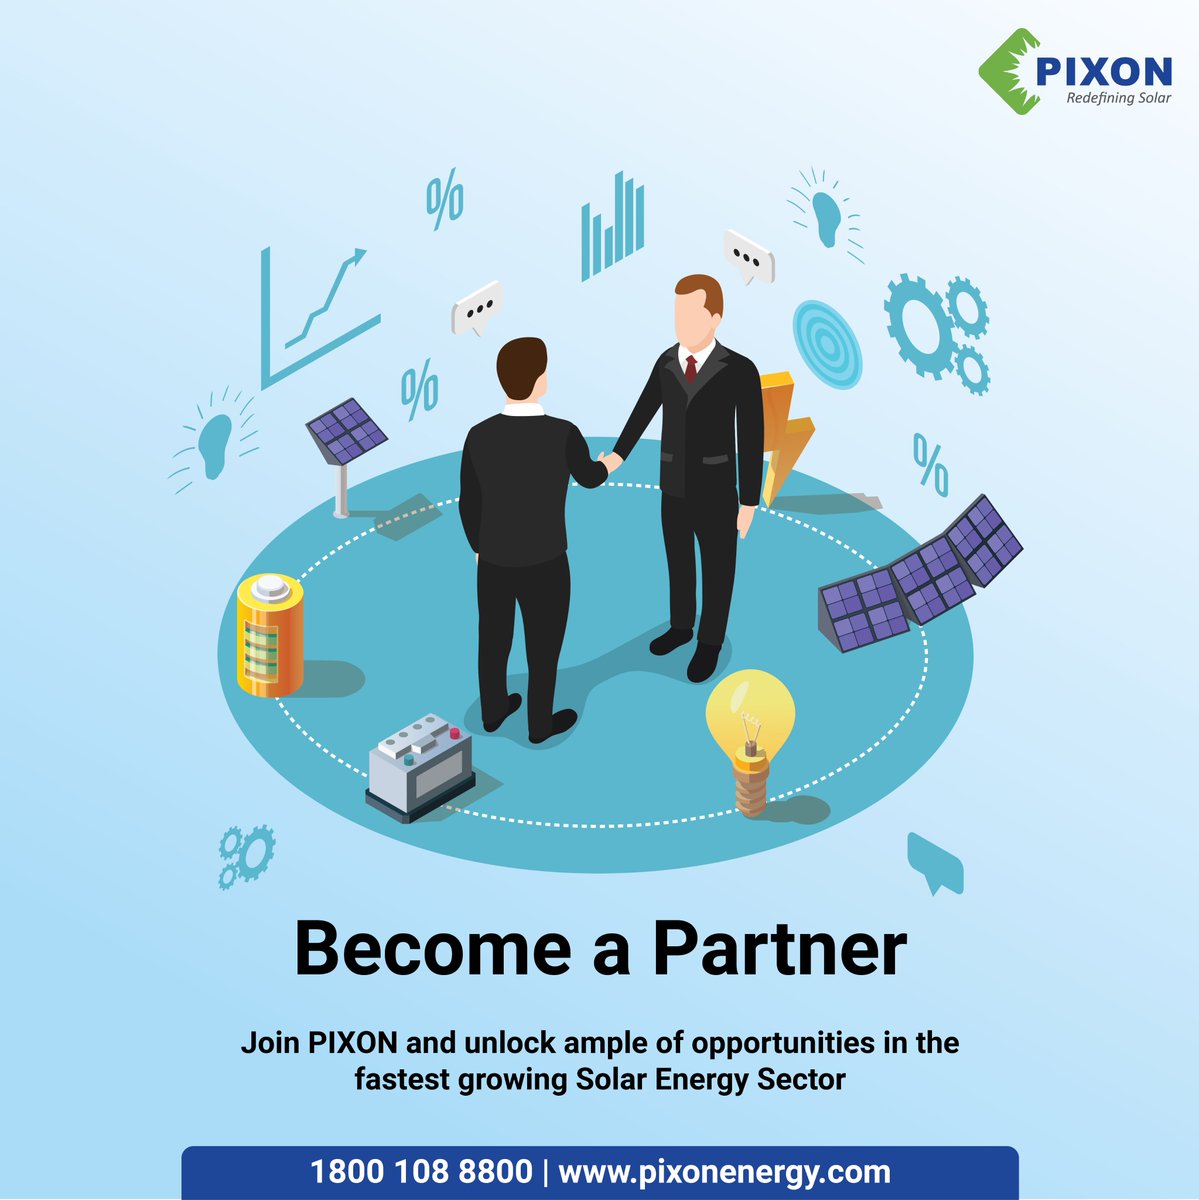 Become our dealer and be at the forefront of technology and innovation. Let's shape the future together!
Apply Now.

#pixonsolar #dealer #solarpower #renewableenergy #modulemanufacturer #solarmodules #solarpanels #sustainablefuture #solarenergy #solar #manufacturing